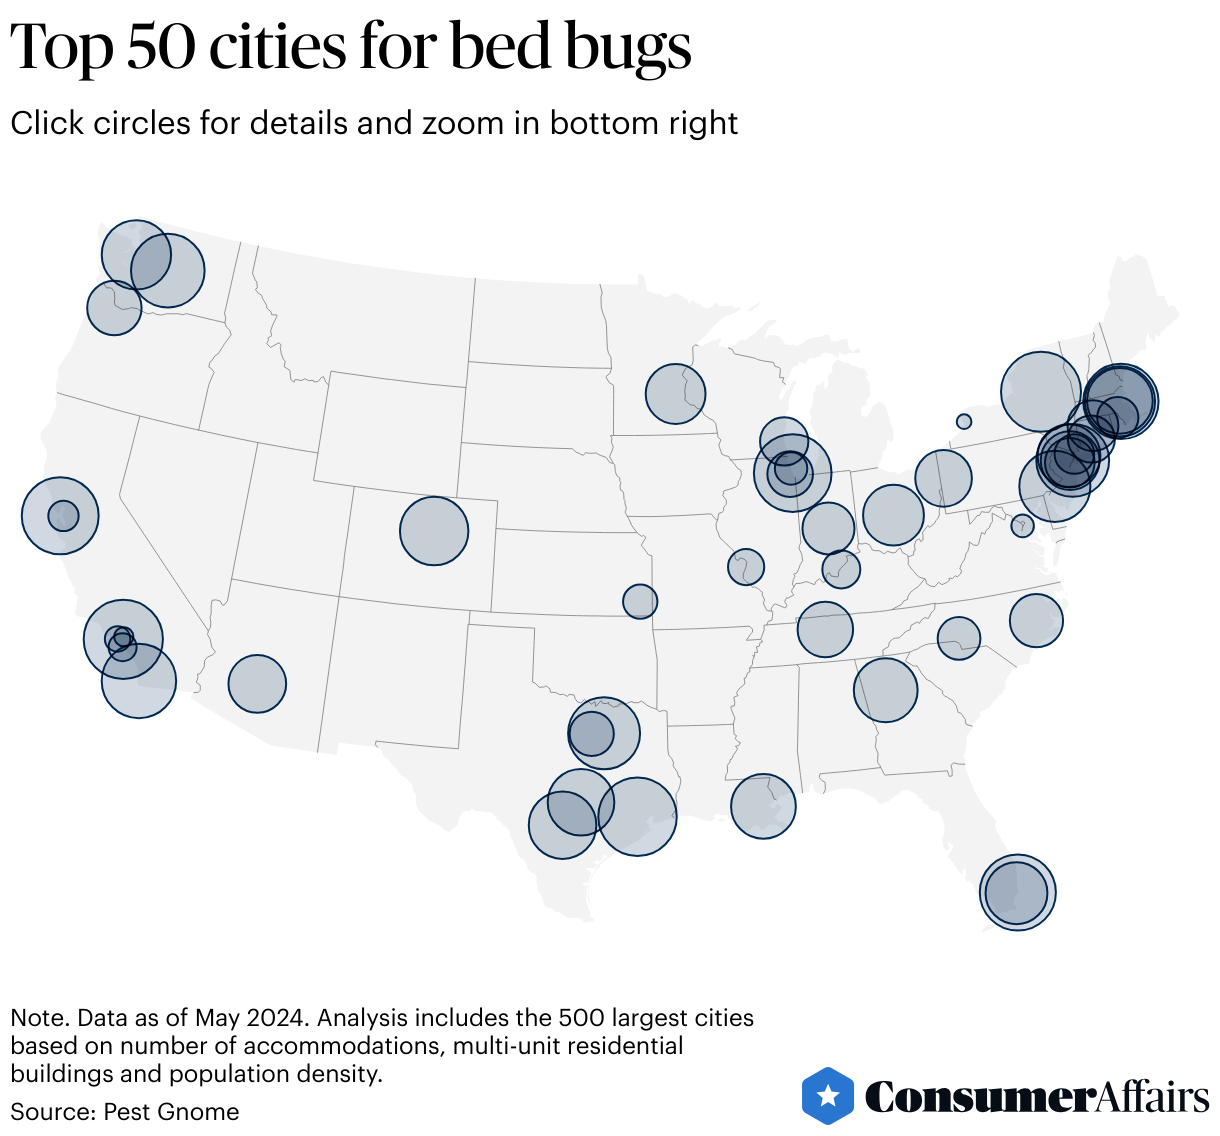 Consumer News: The bed bug picture: bleak and getting worse in some towns